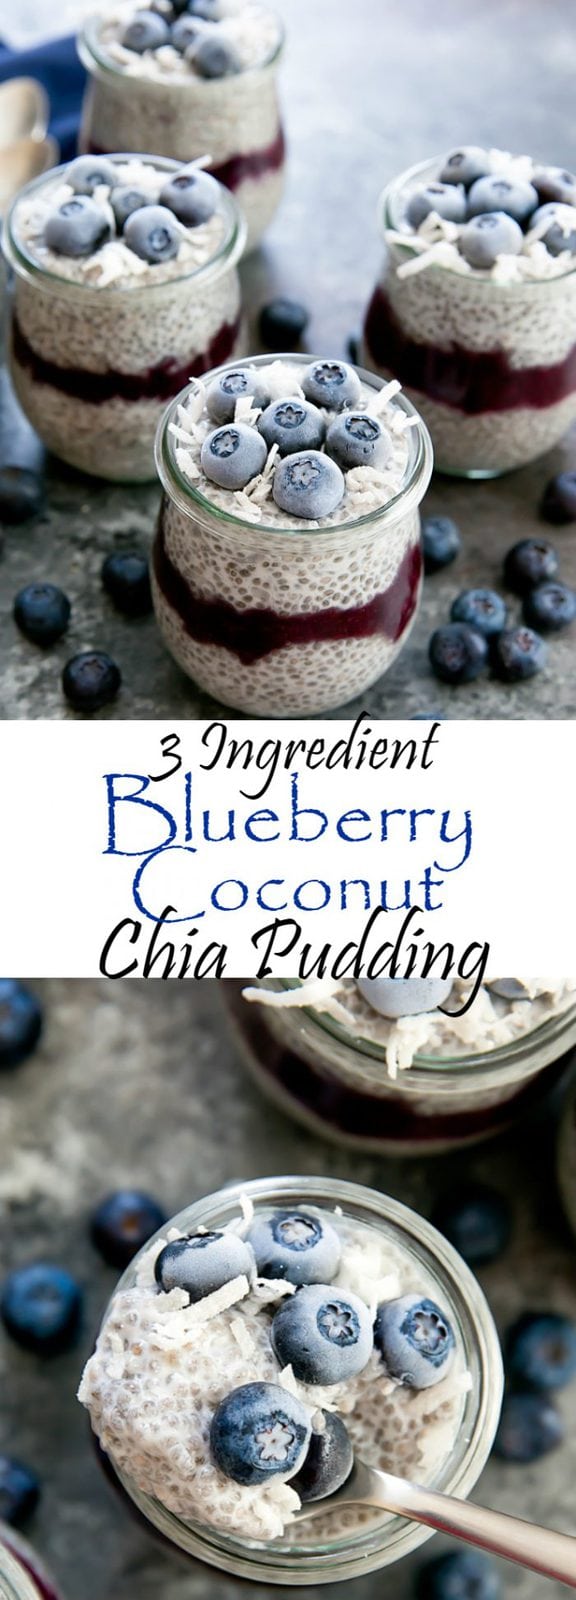 3 Ingredient Blueberry Coconut Chia Pudding